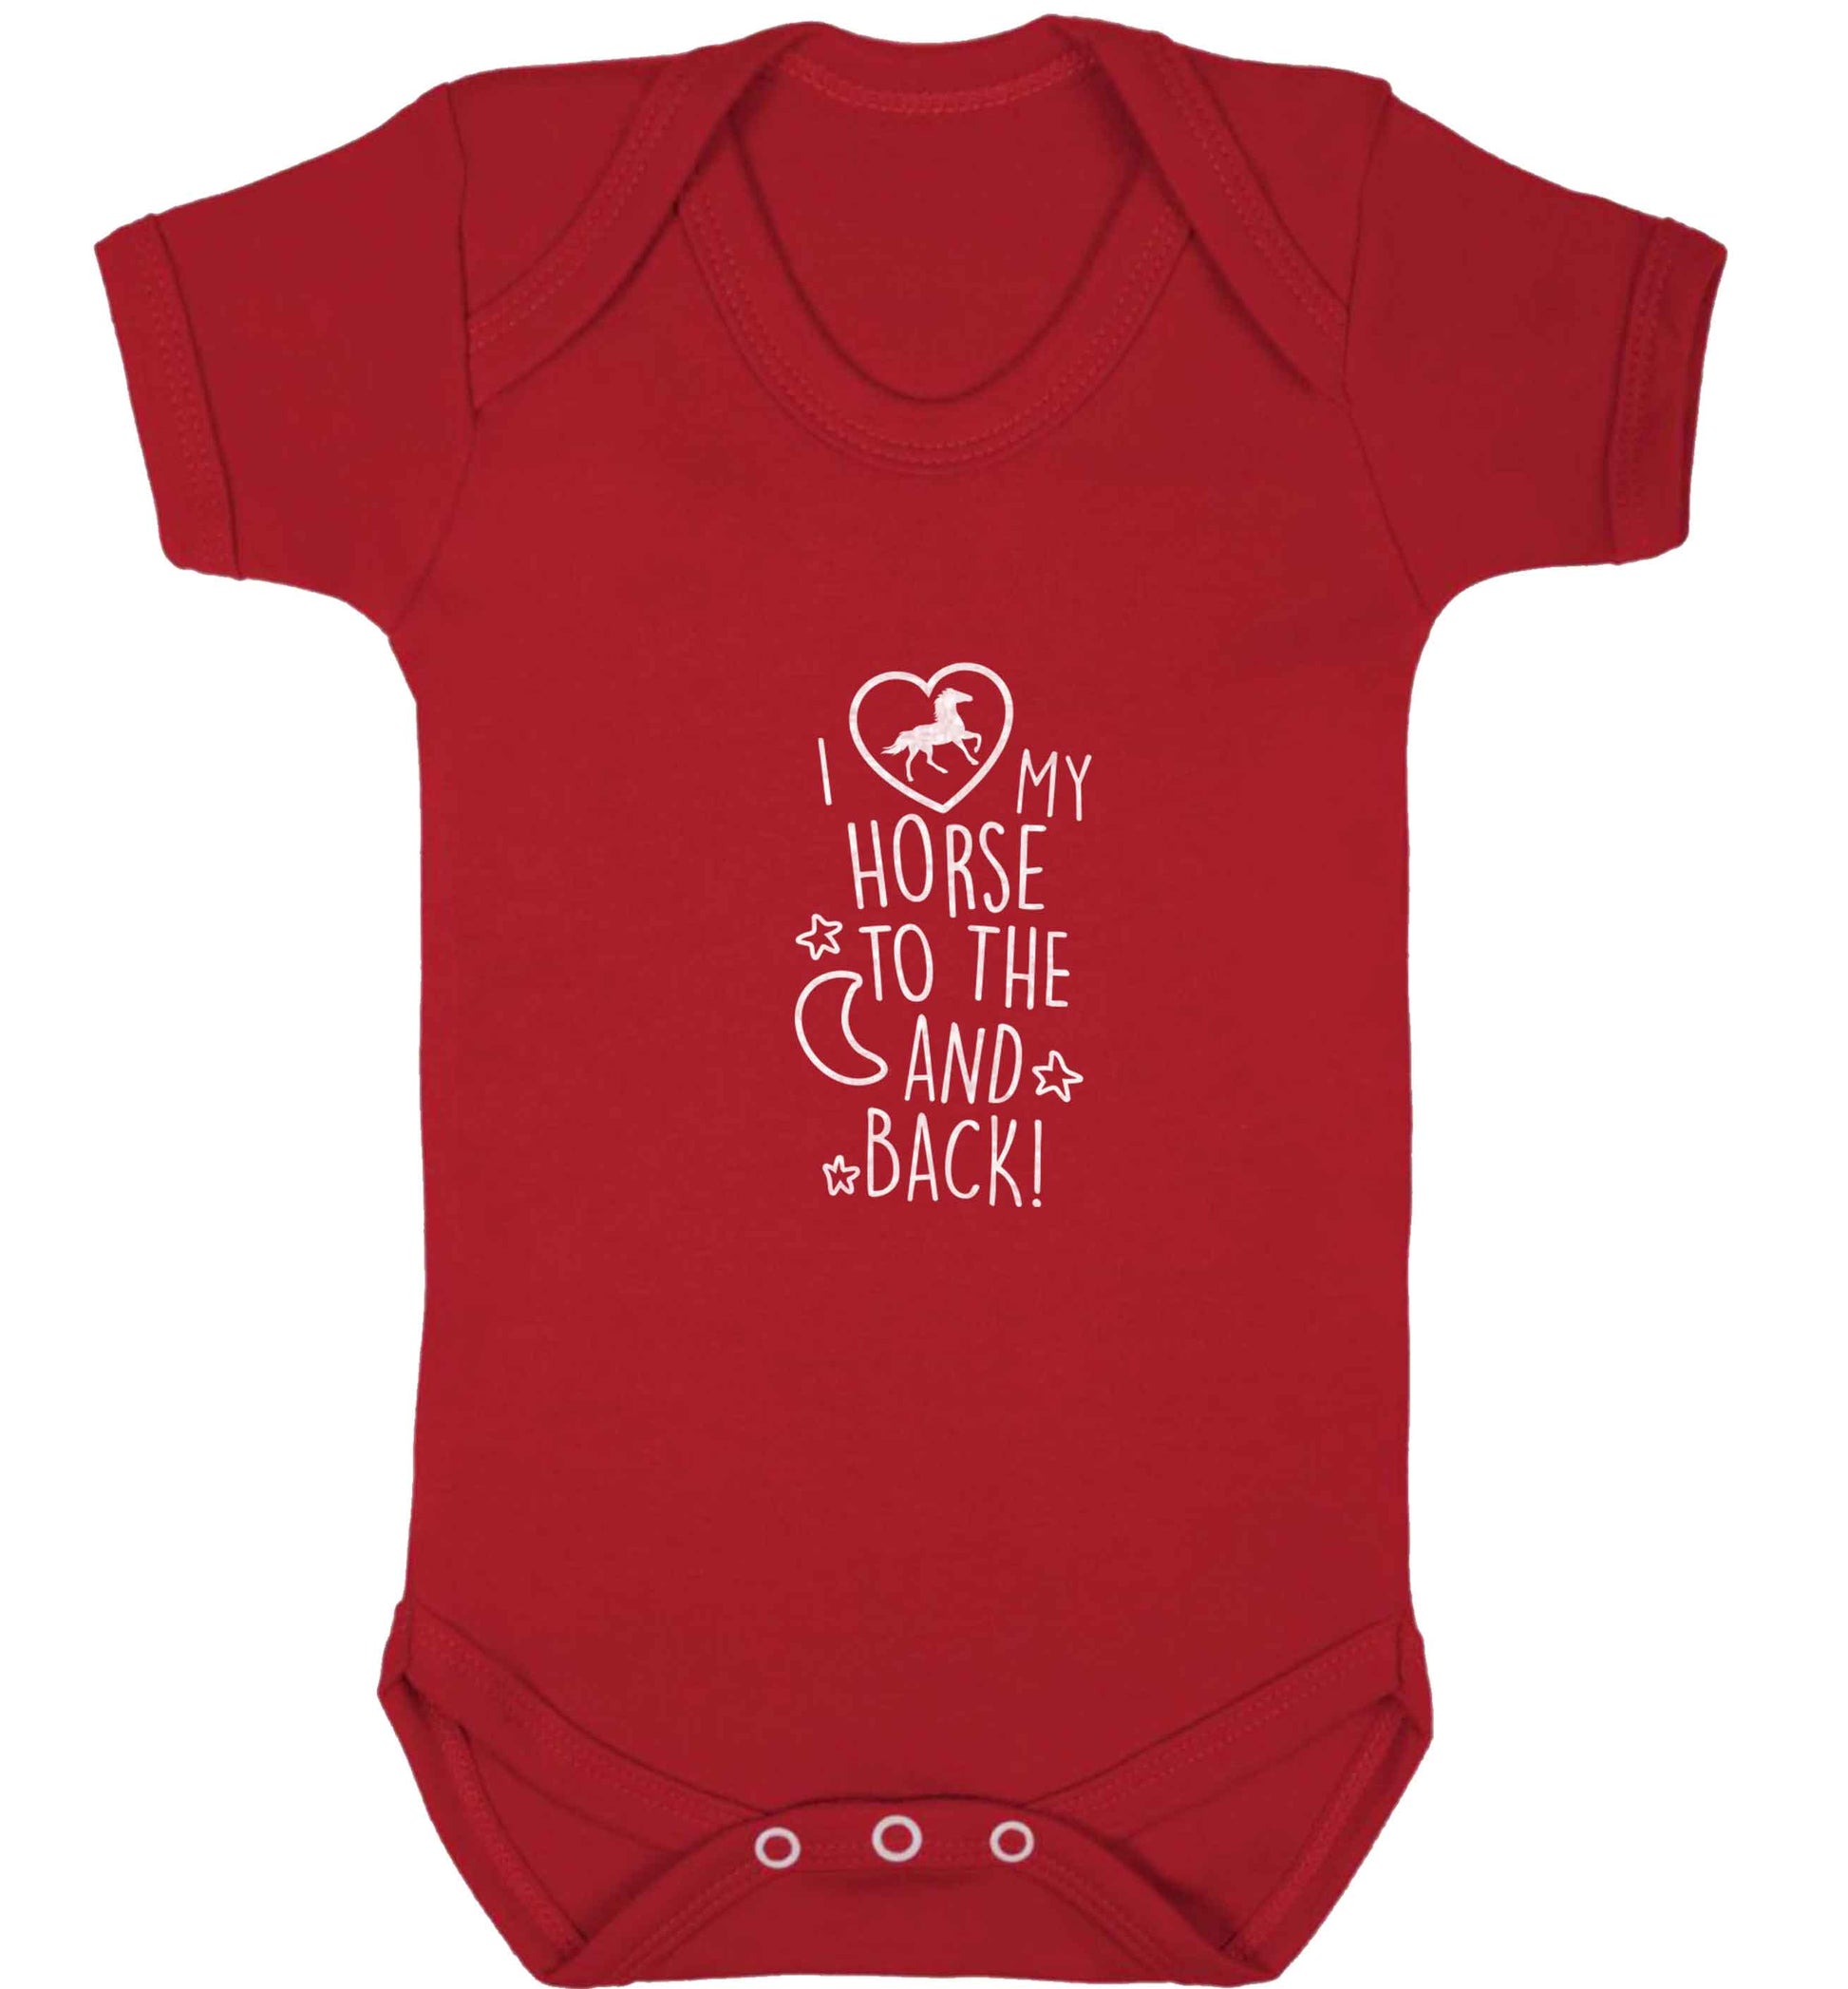 I love my horse to the moon and back baby vest red 18-24 months